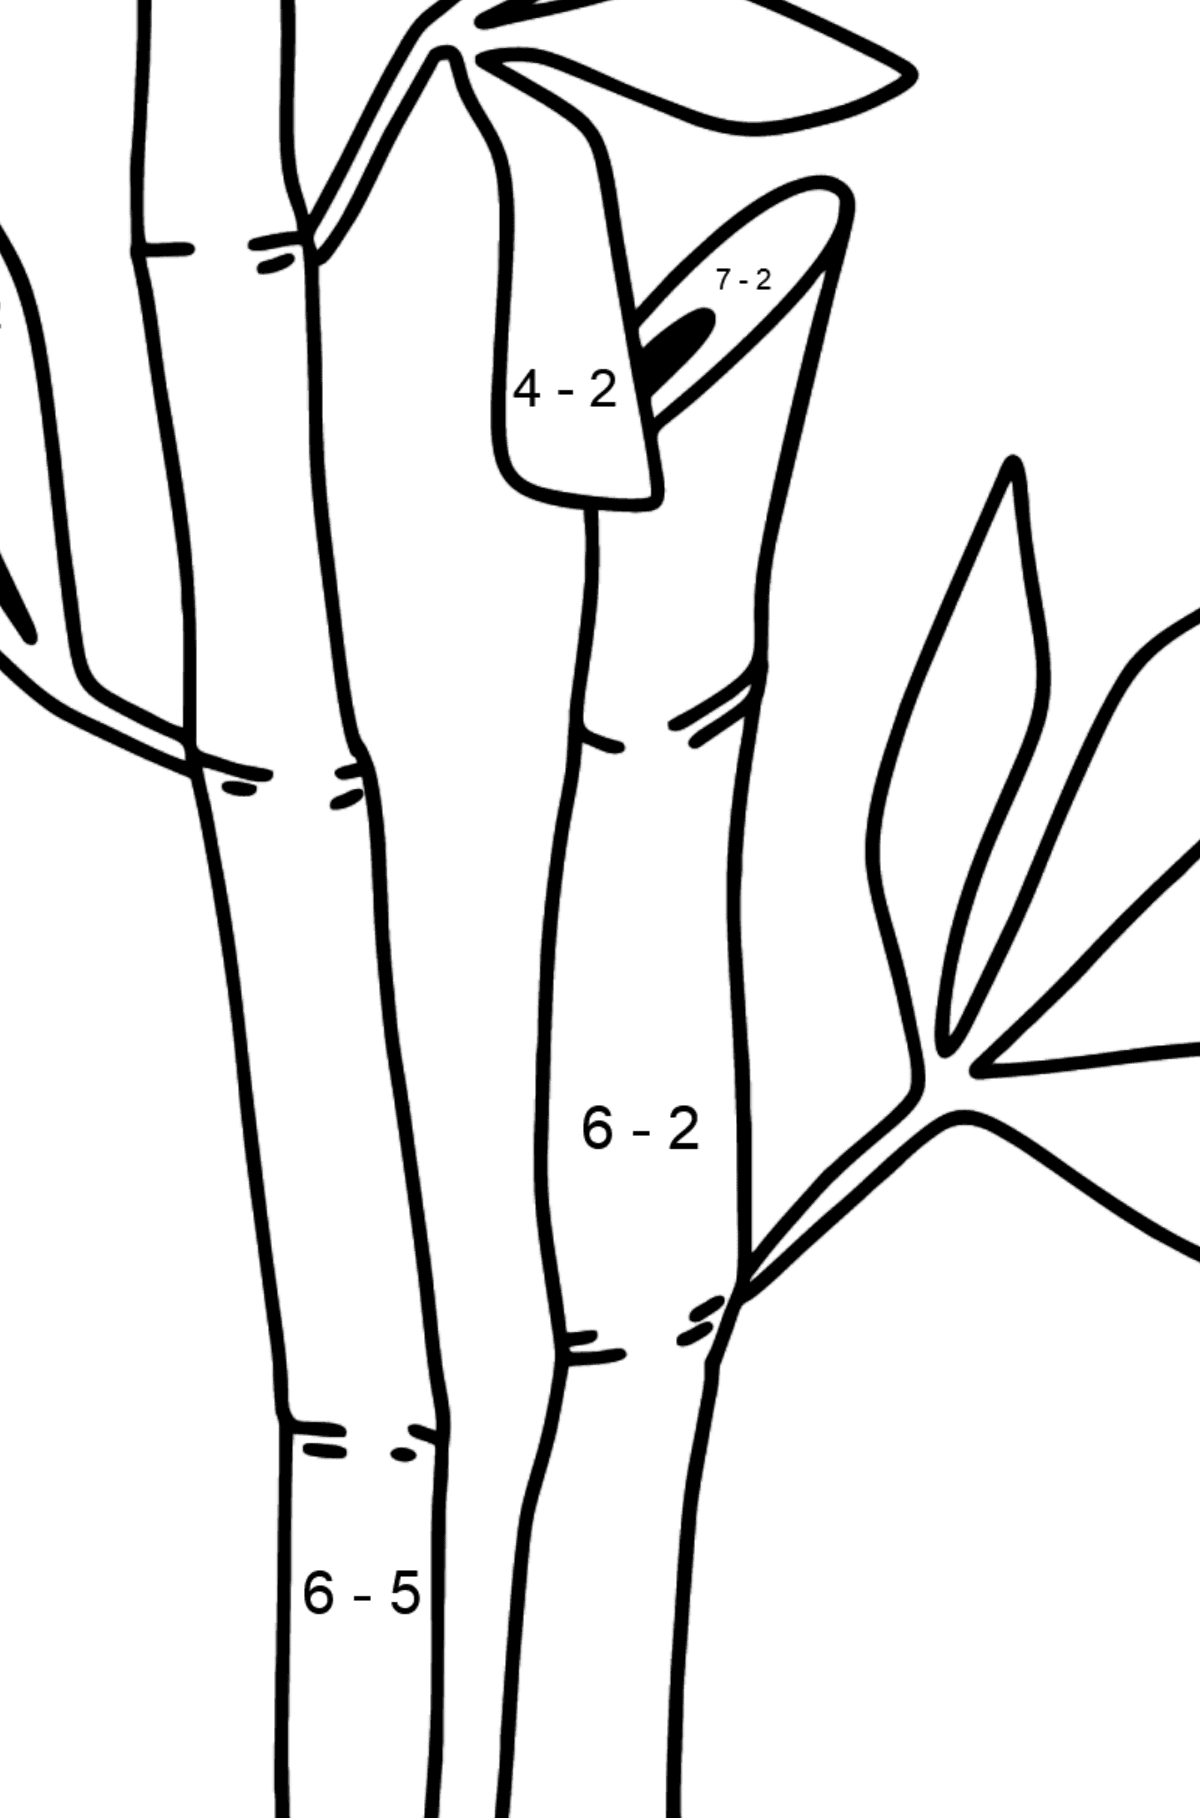 Bamboo coloring page - Math Coloring - Subtraction for Kids